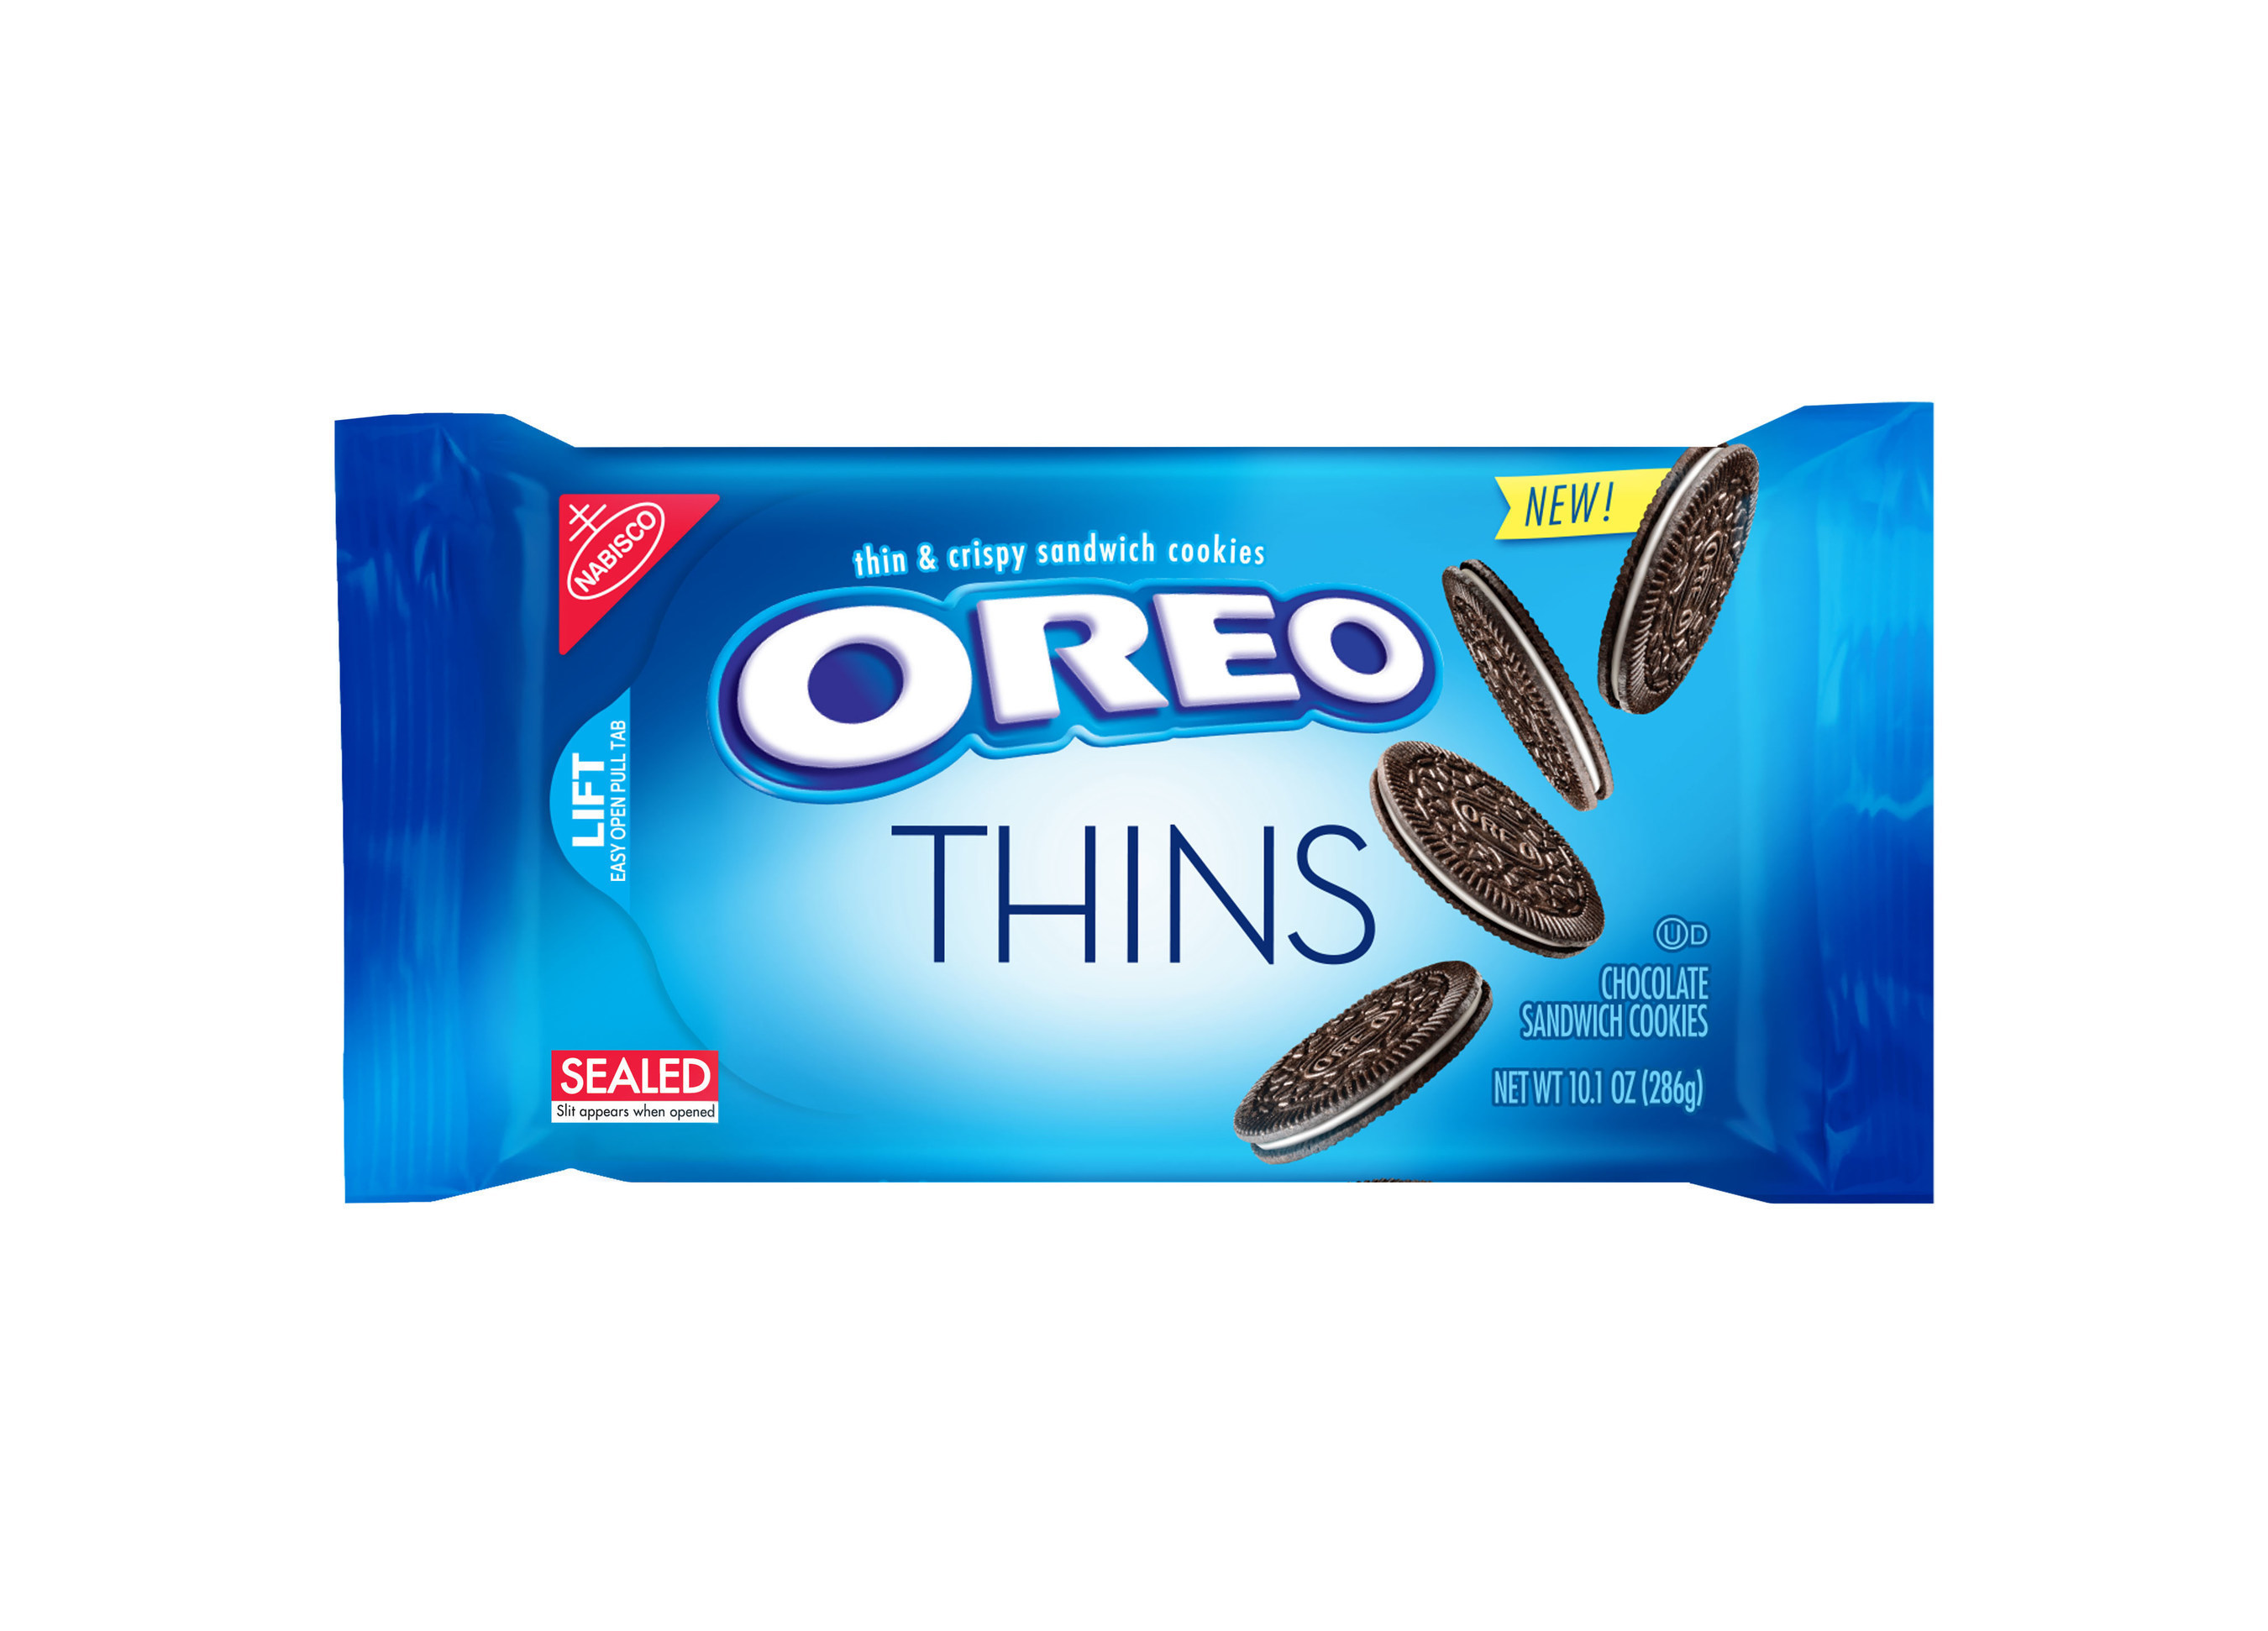 This July OREO is launching OREO Thins, a crisp, delicate take on the cookie you know and love.